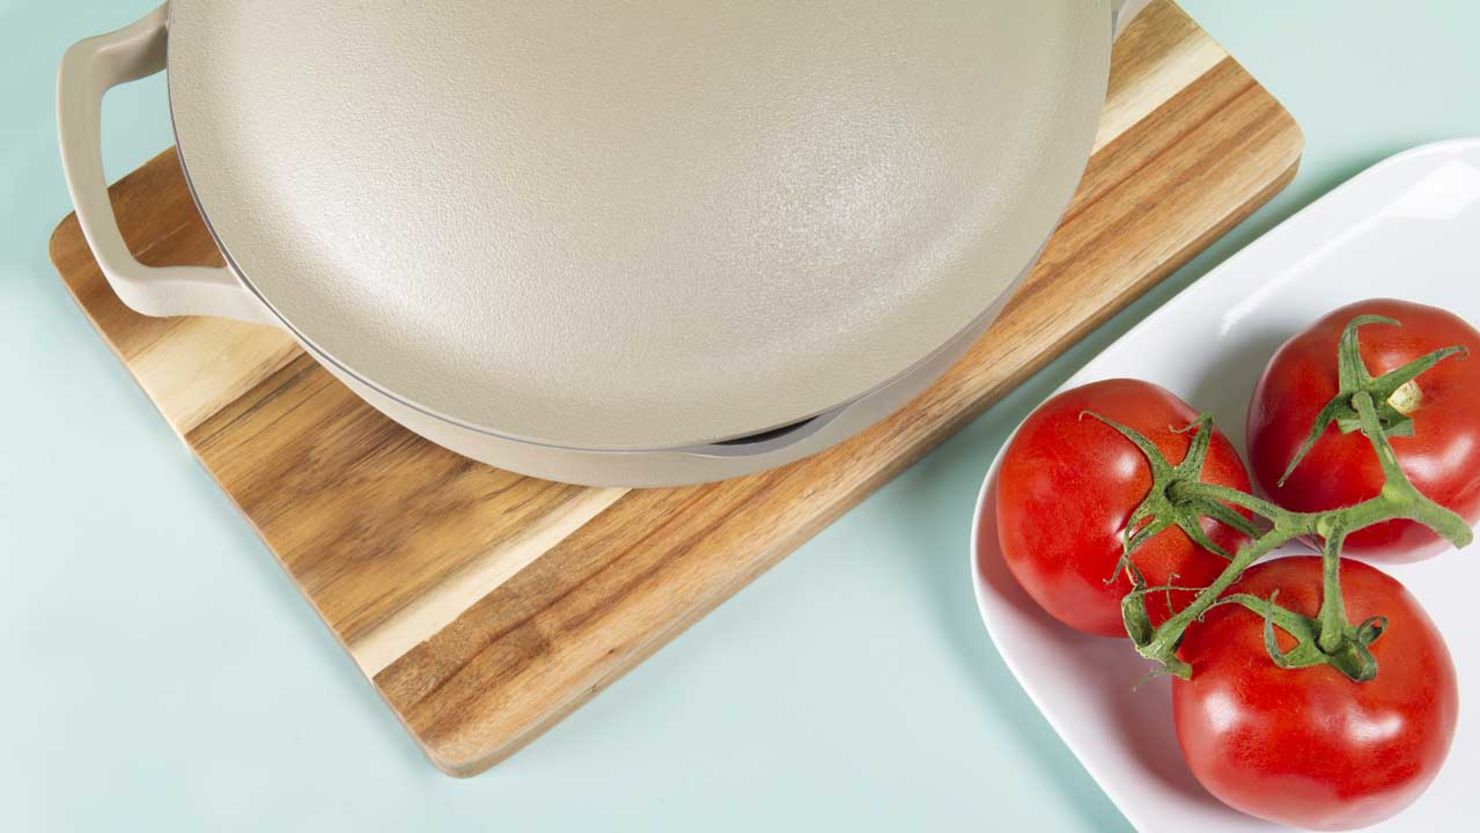 The Always Pan Can Replace Most of Your Cookware by Itself